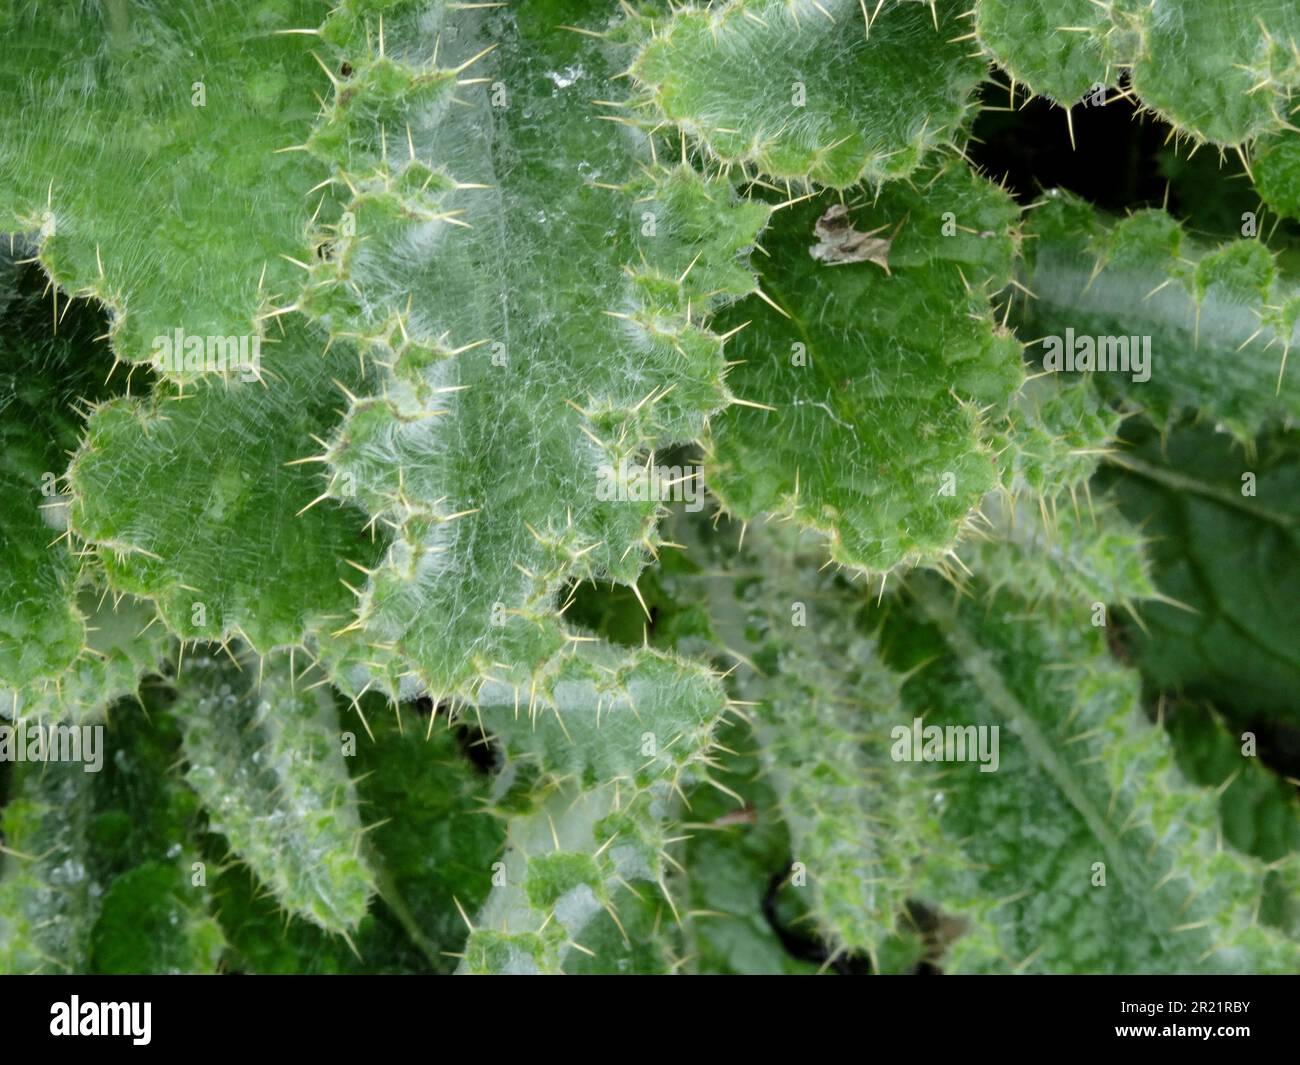 Highly textured plant patterns and structures of young Berkheya Purpurea., Stock Photo